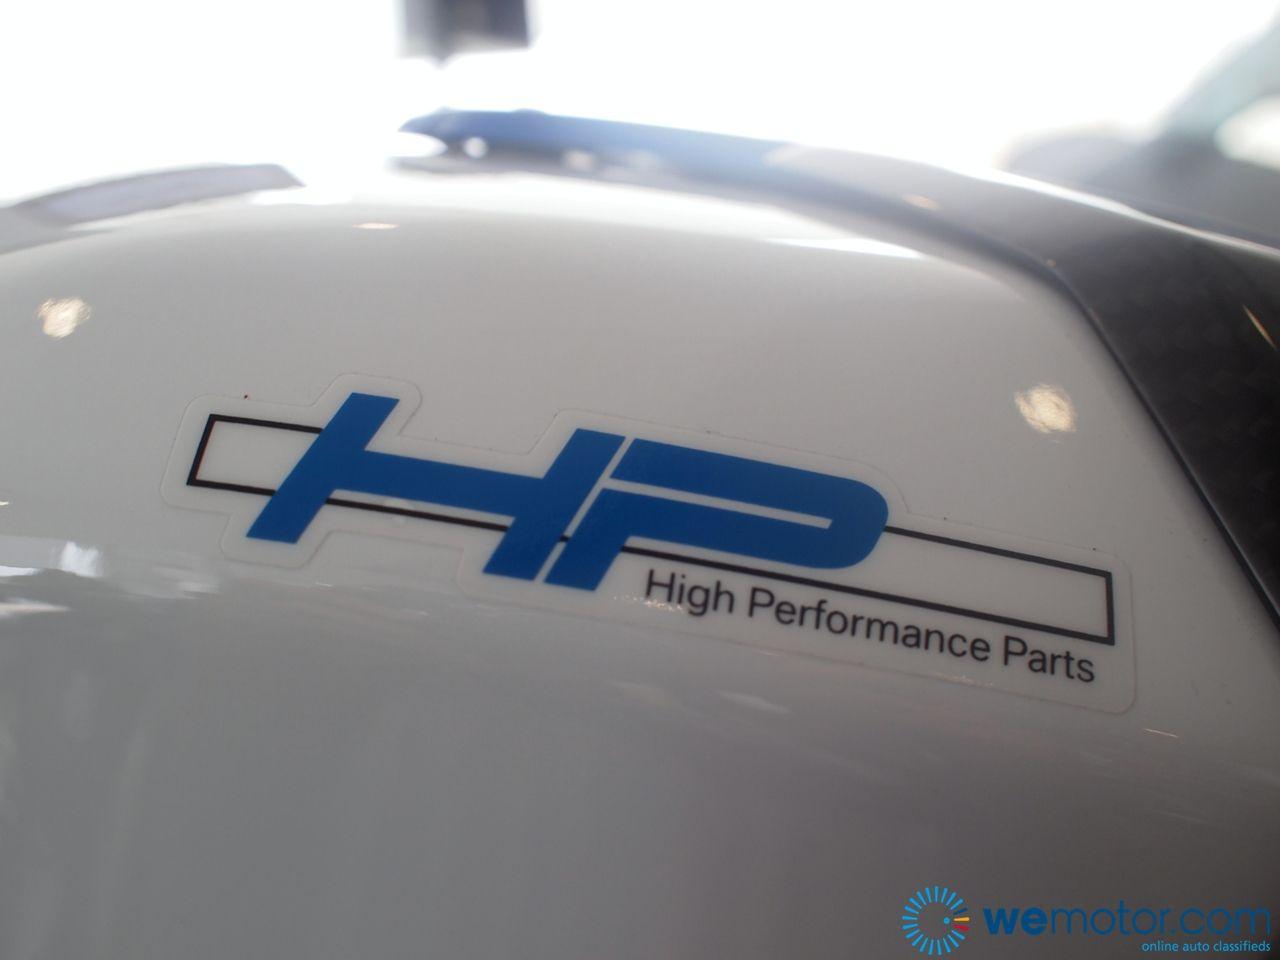 BMW HP Logo - The All New 2013 BMW HP4 Unleashed In Malaysia RM444 And RM158